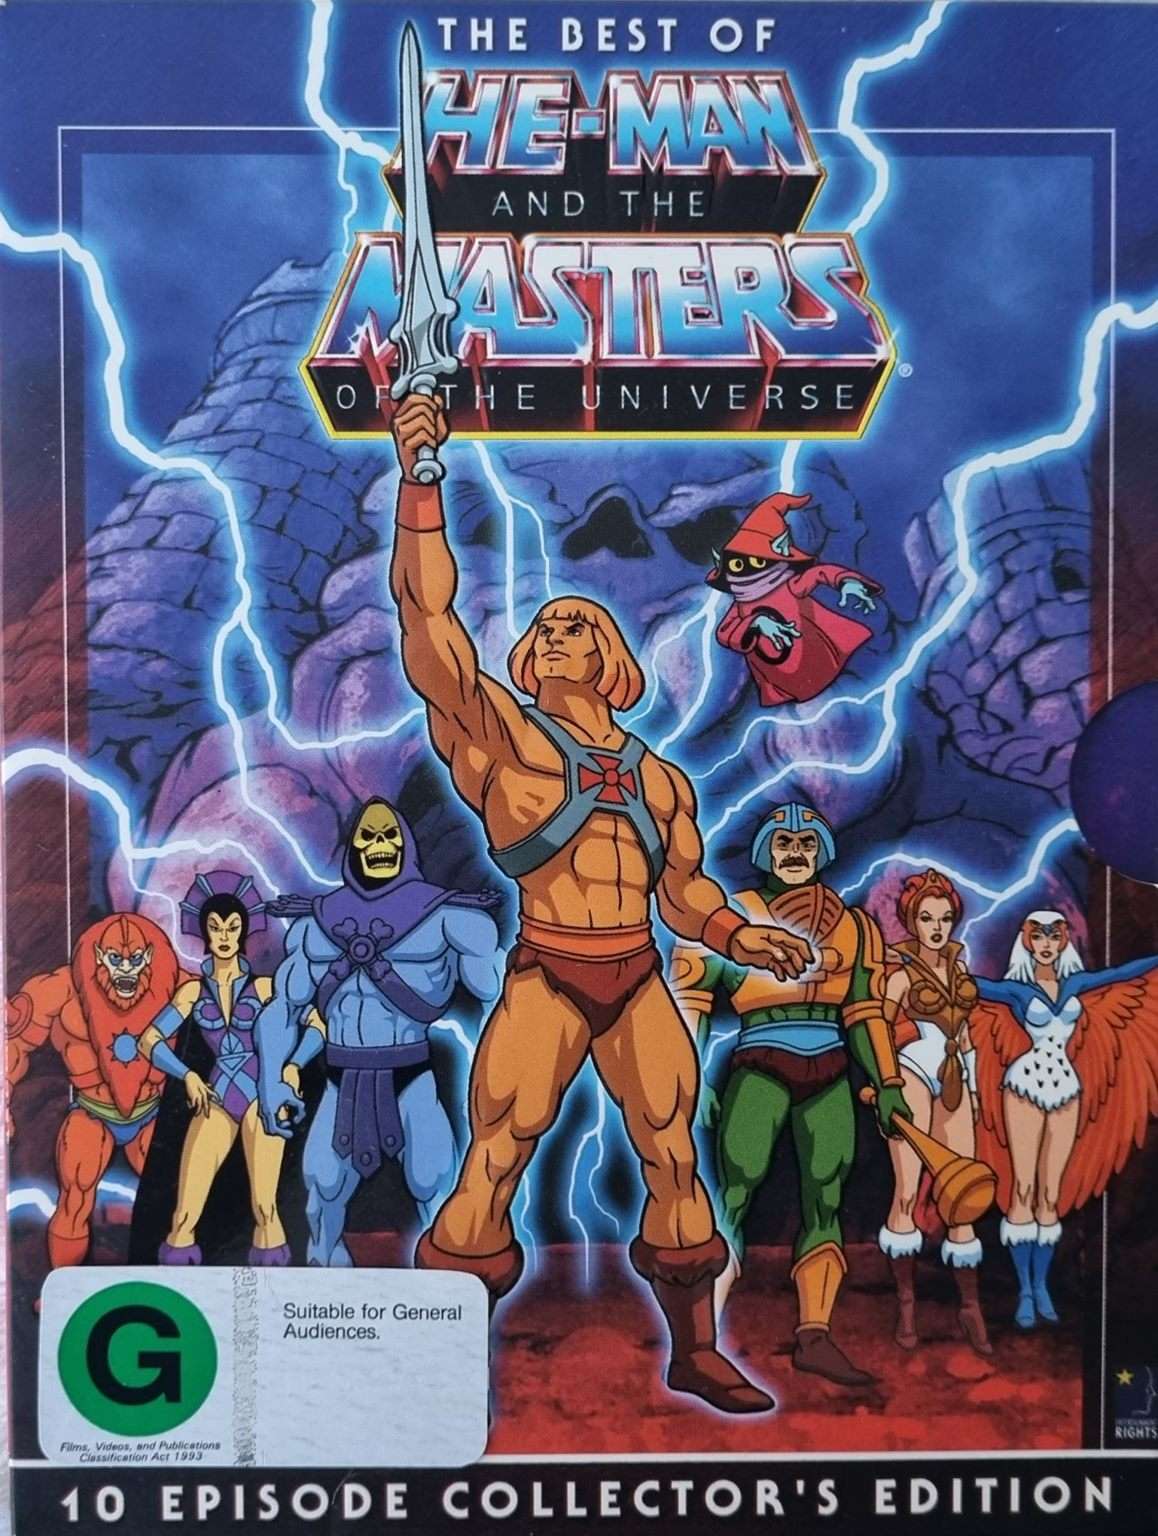 The Best of He-Man and the Masters of the Universe 10 Episode Collector's